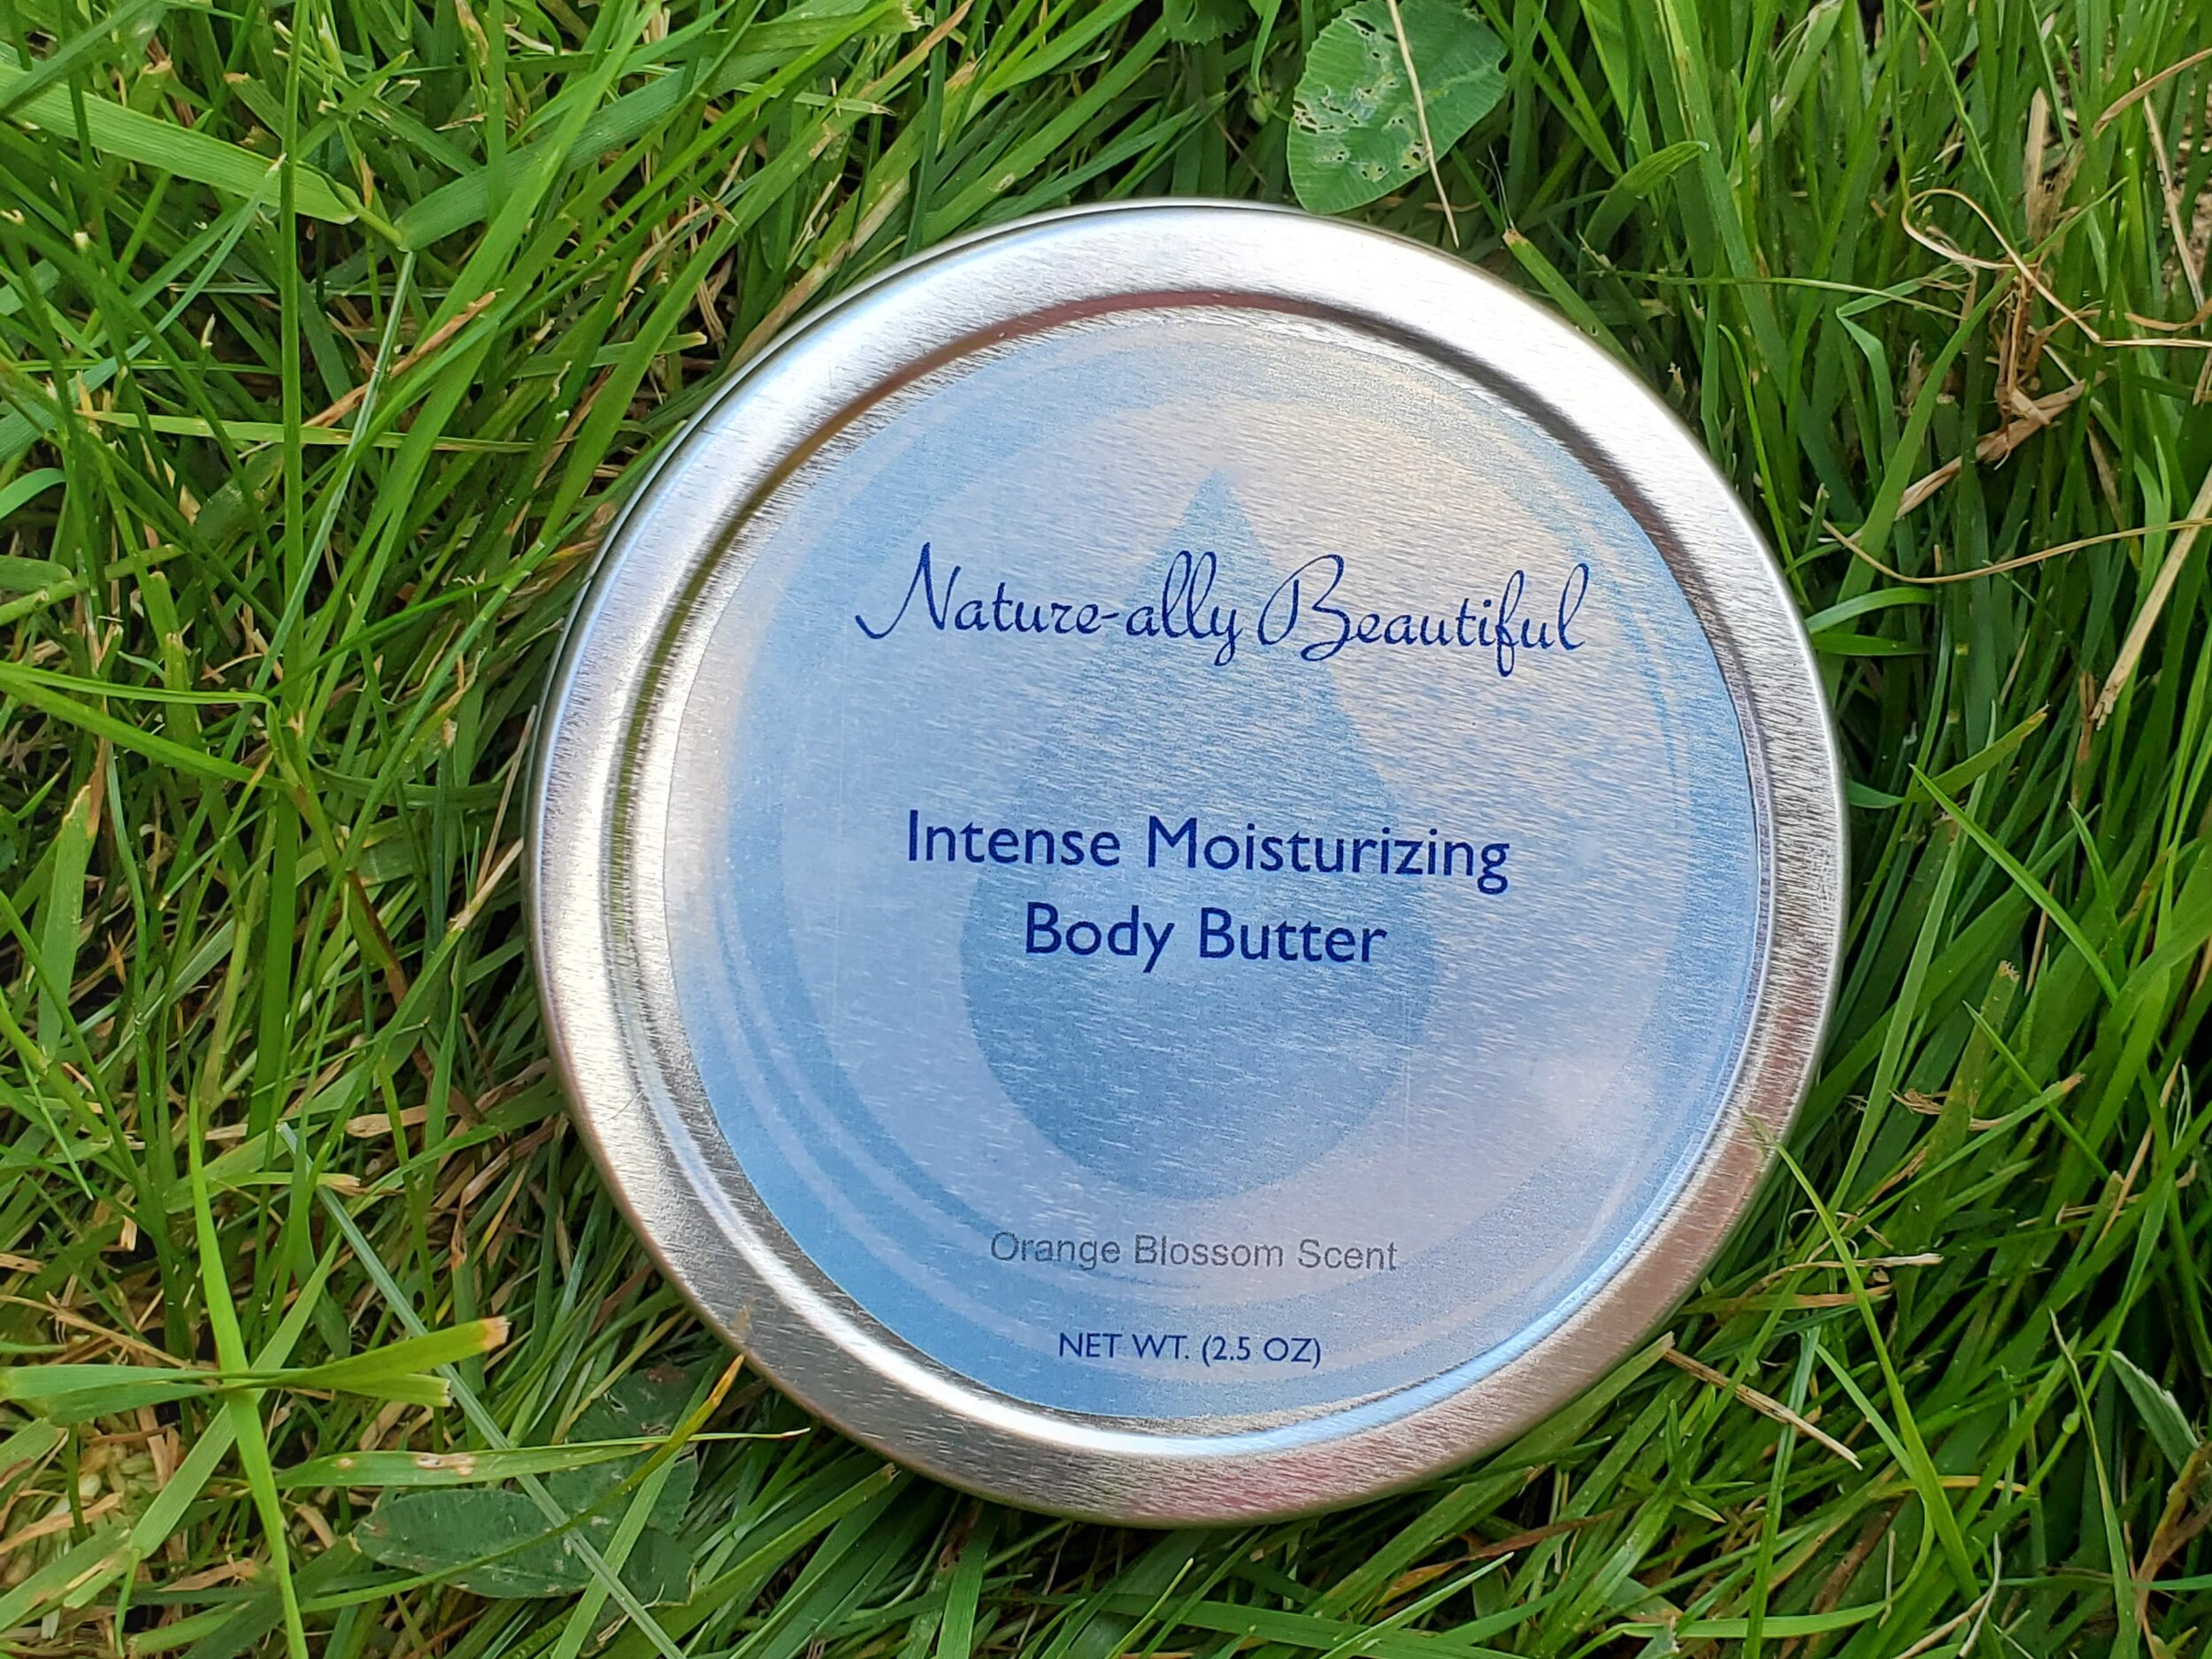 — Hydrating Natureally Hand, Butter Intensive Nail Body Beautiful &